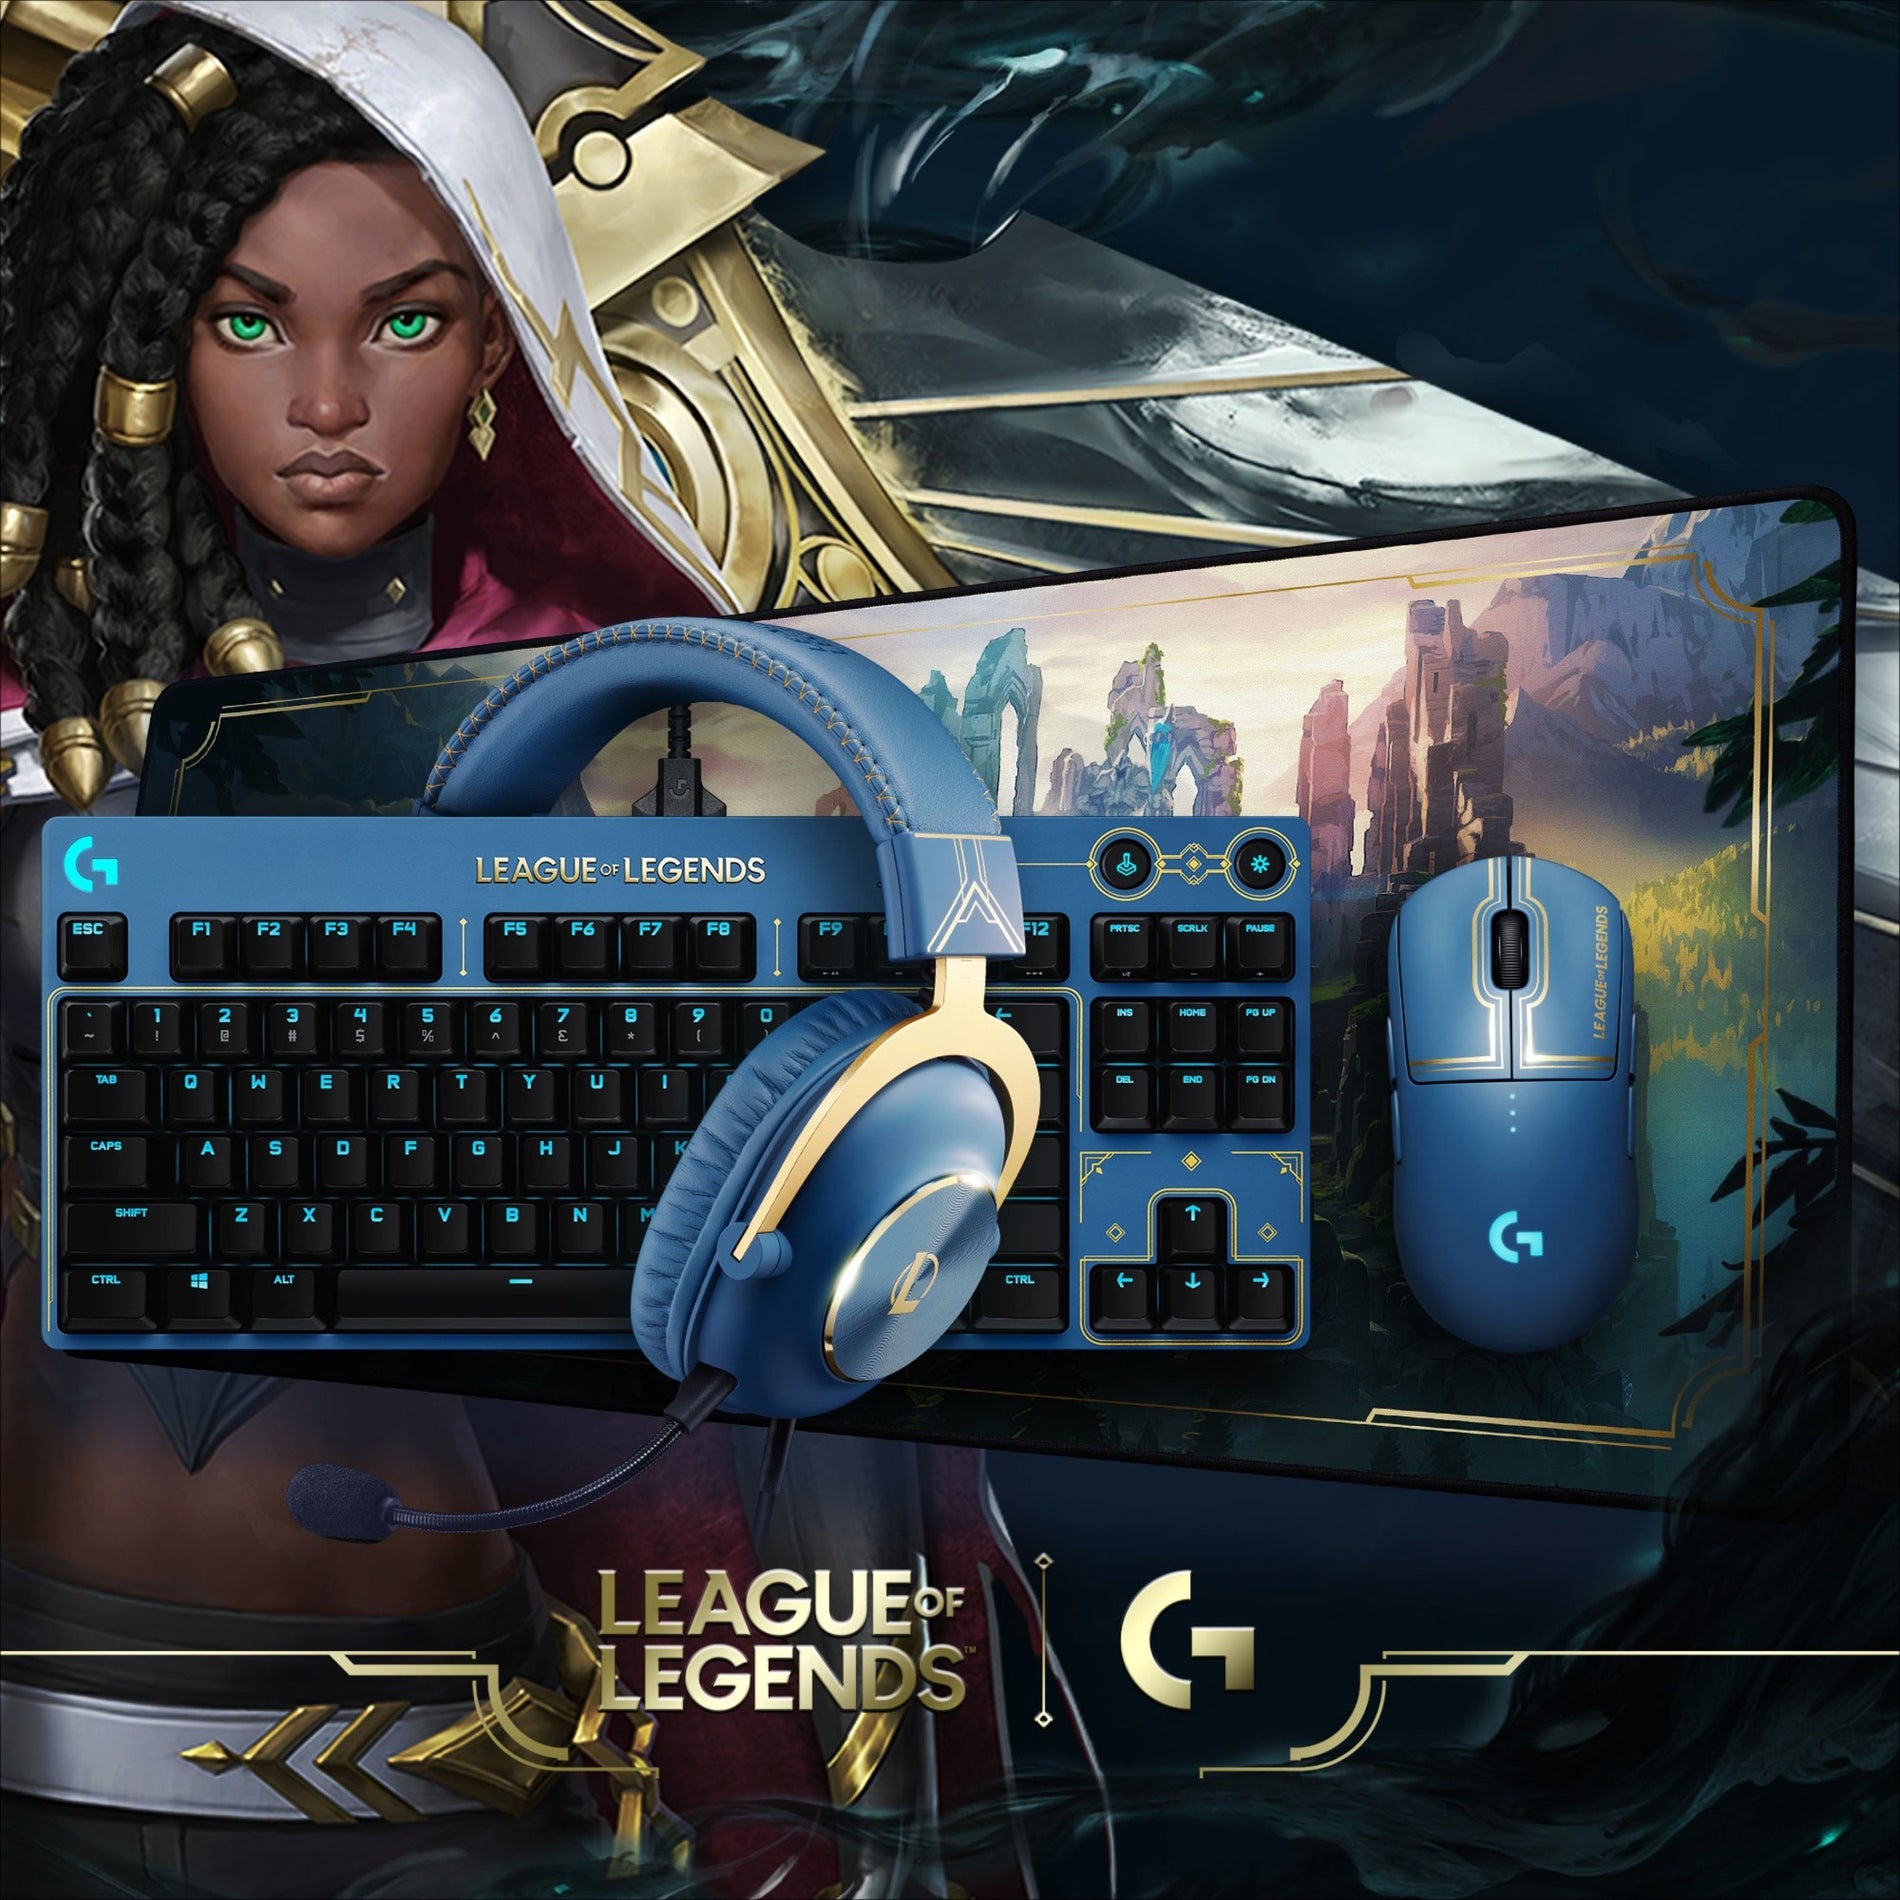 Logitech 943-000543 G840 XL Gaming Mouse Pad League of Legends Edition, Extra Large Size, Rubber and Cloth Material